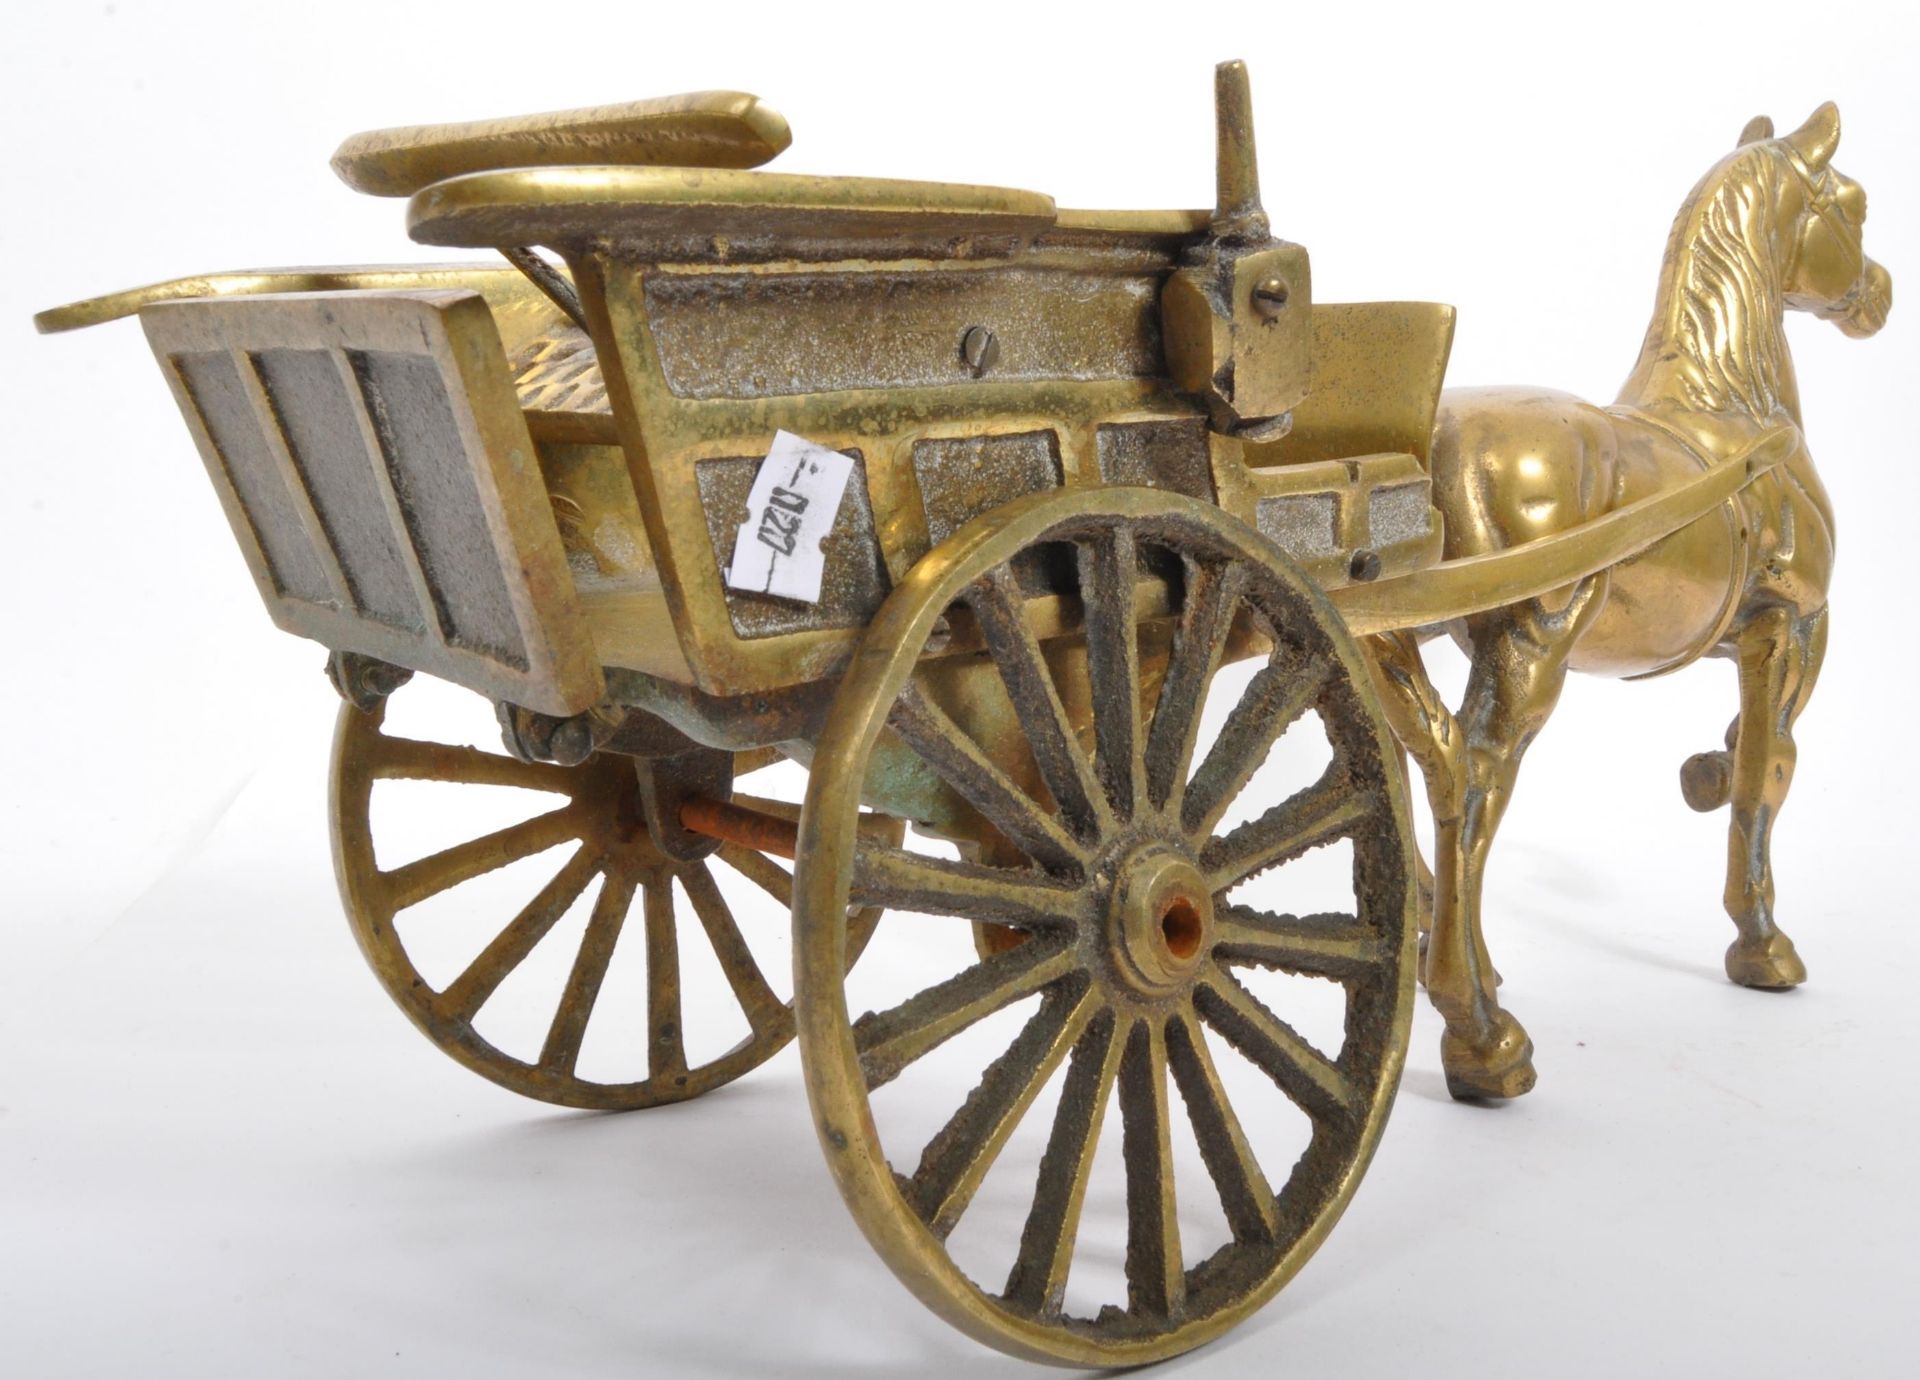 TWO VINTAGE 20TH CENTURY BRASS HORSE & CART FIGURES - Image 4 of 6